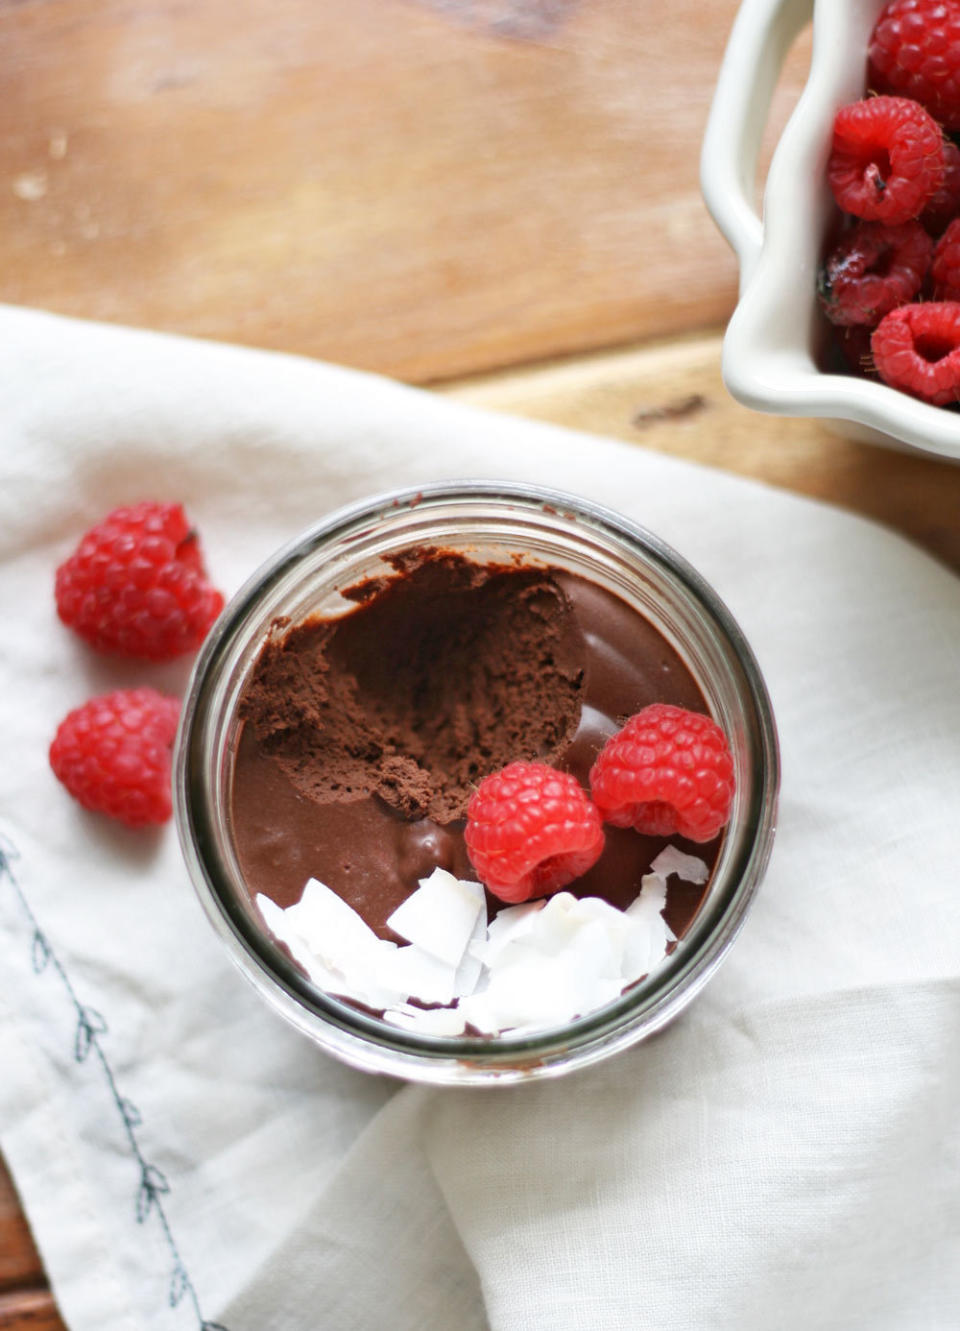 <strong>Get the <a href="http://www.organicauthority.com/vegan-chocolate-mousse-recipe-with-the-savviest-ingredient-ever/" target="_blank">Chocolate Aquafaba Mousse recipe</a>&nbsp;from VeguKate</strong>